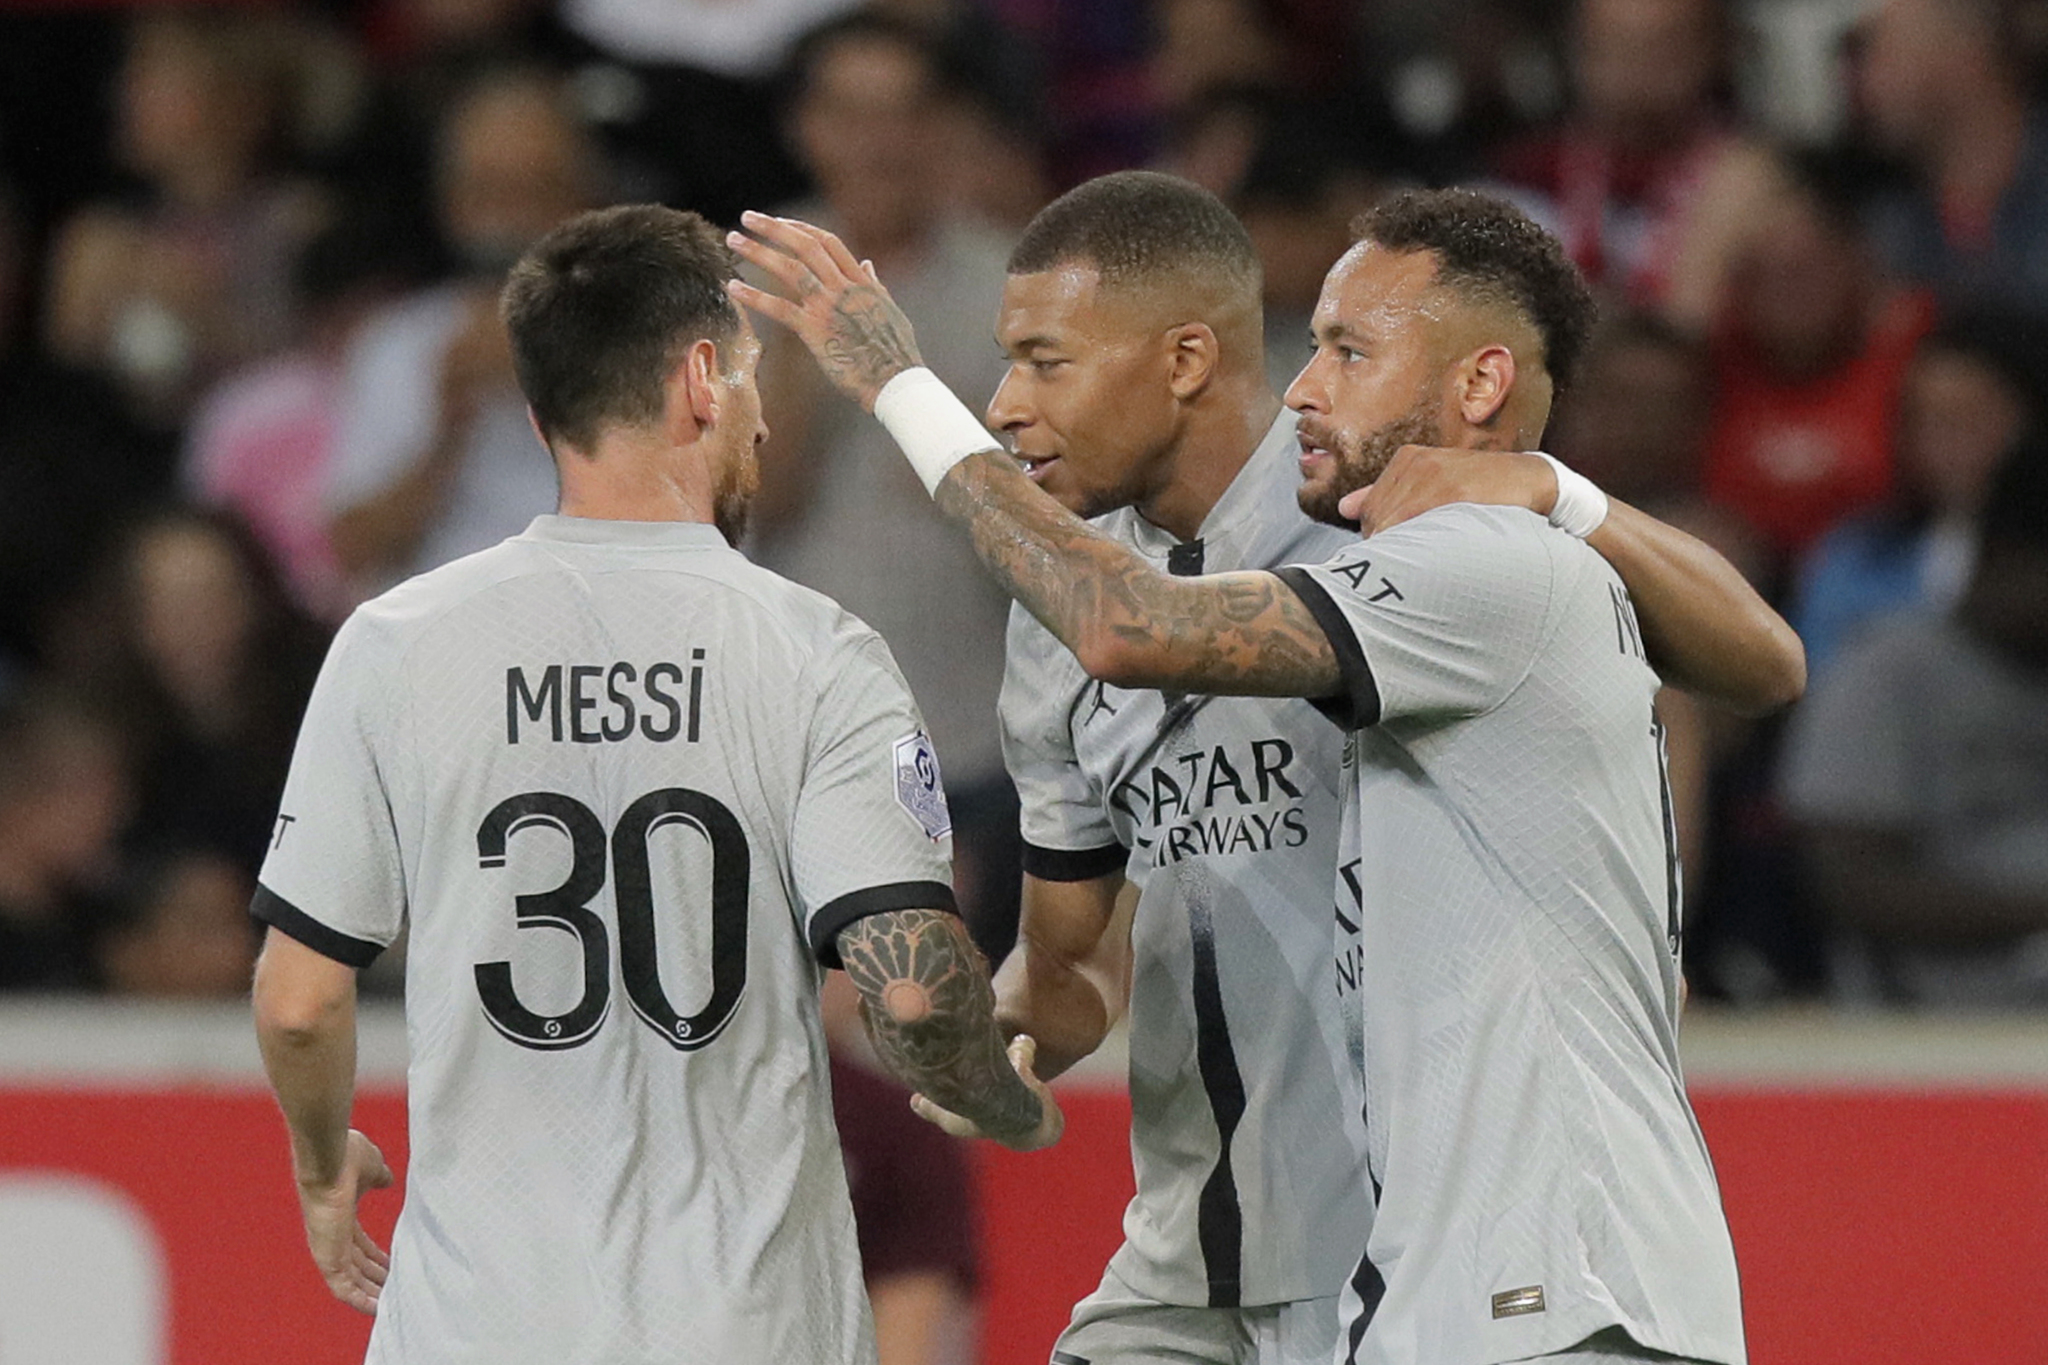 Lionel Messi, Kylia Mbappe and Neymar react after scoring a goal against Lille (AP Photo/Michel Spingler)